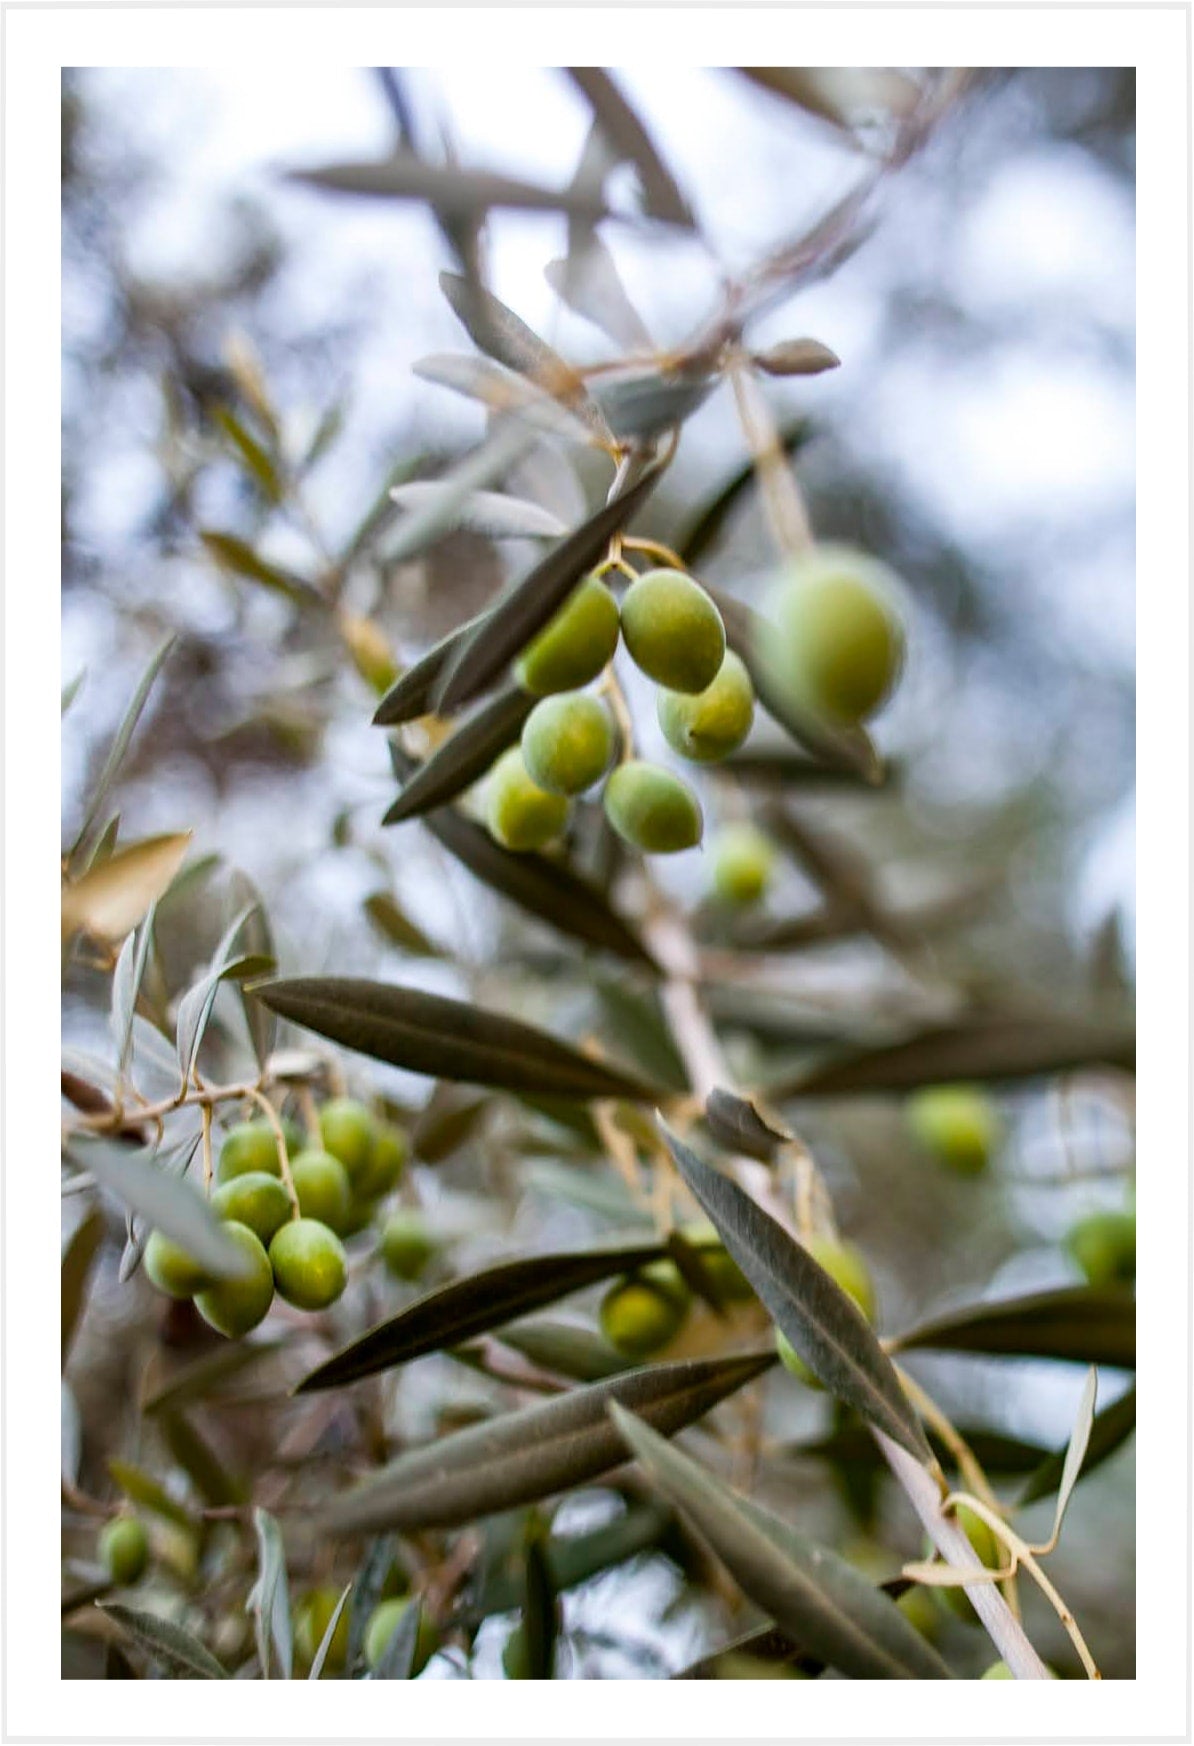 Moroccan Olives